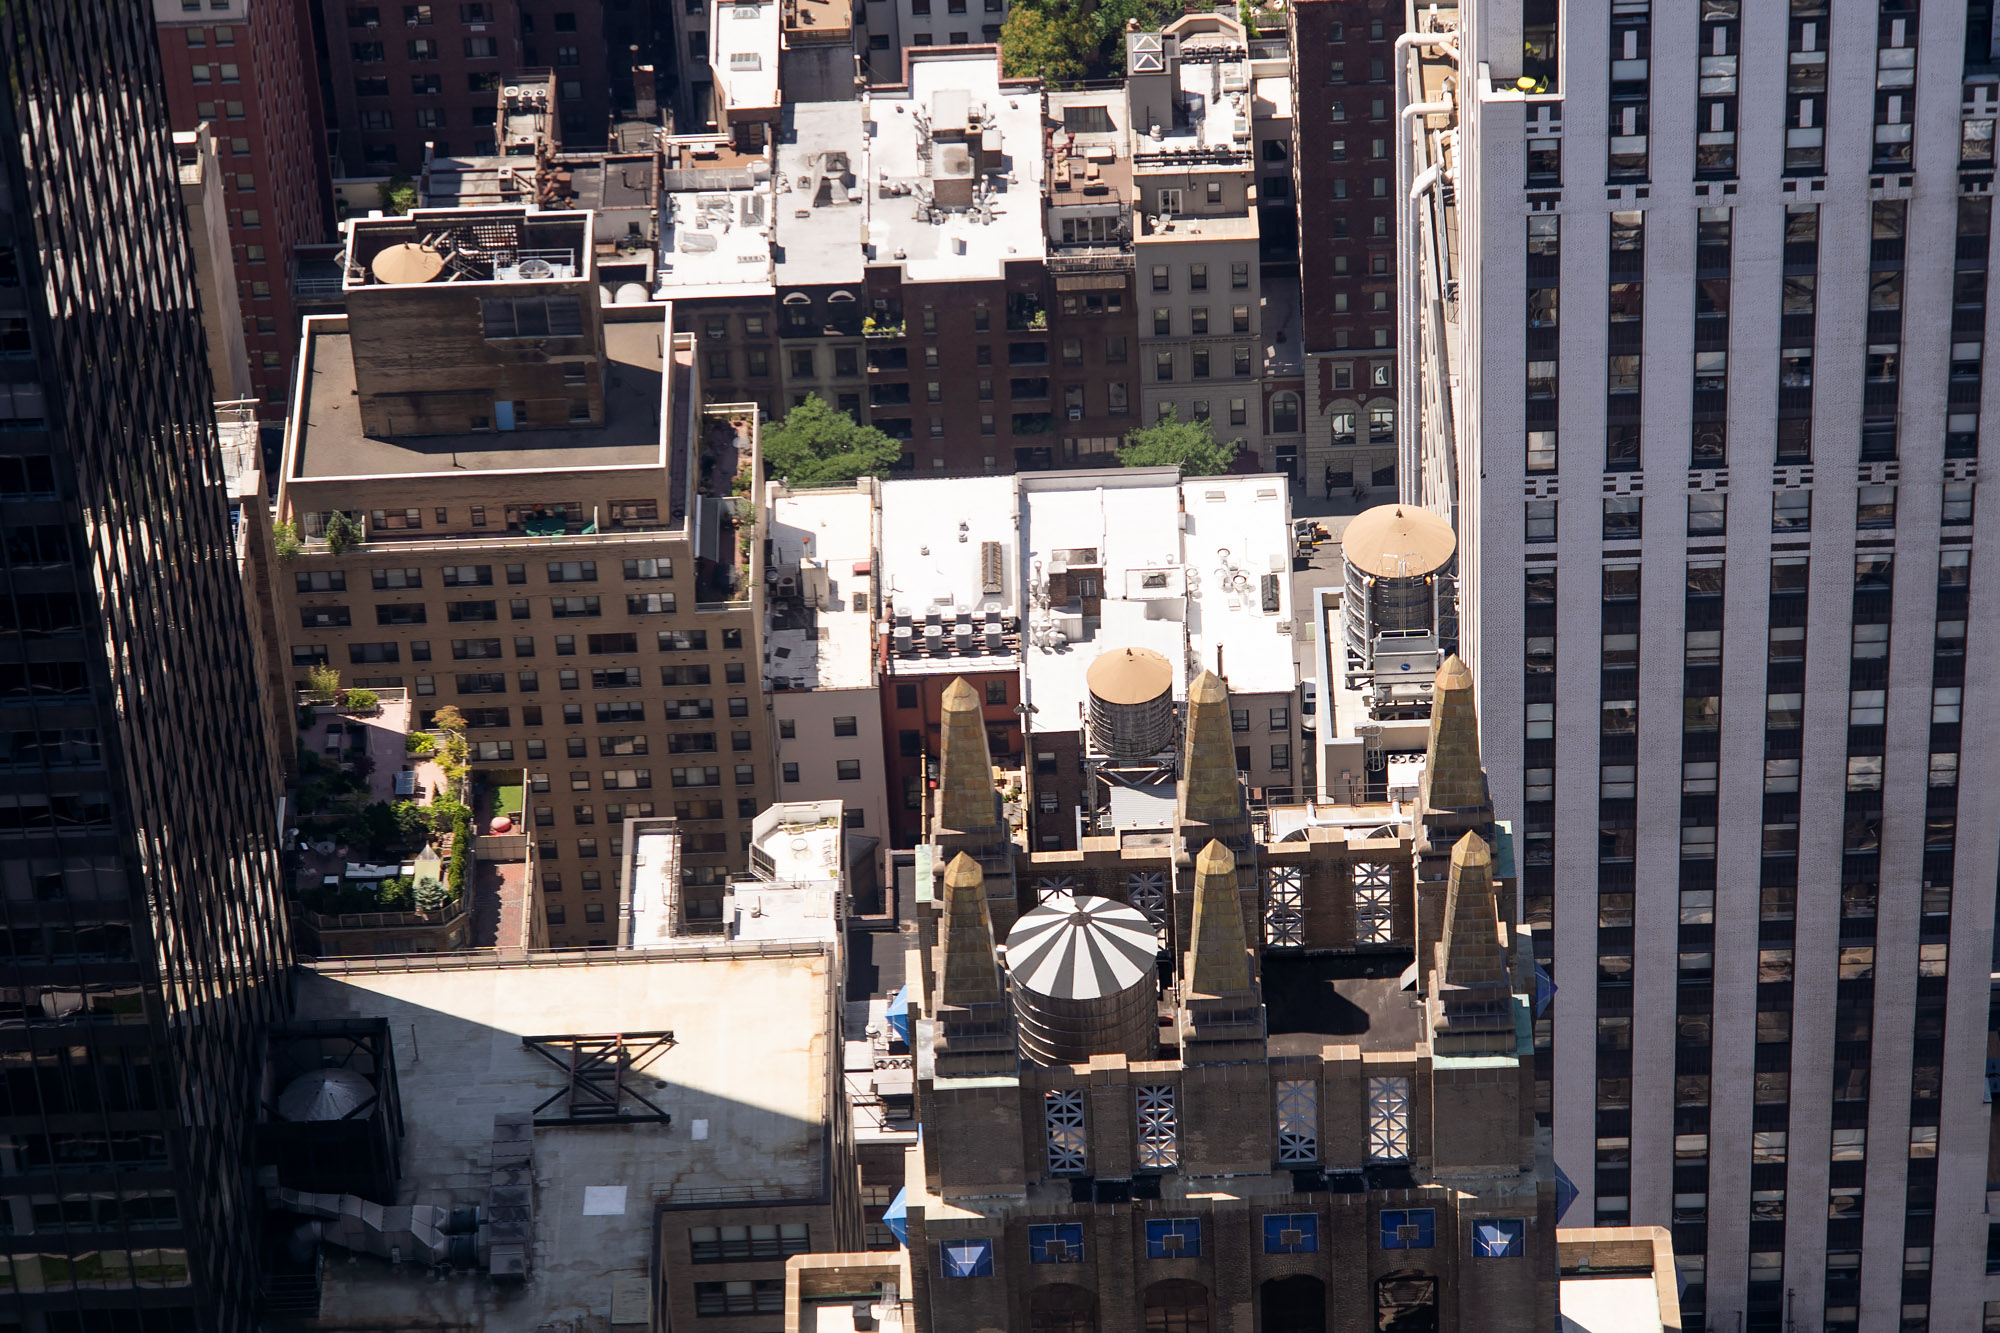 Roof of New York City